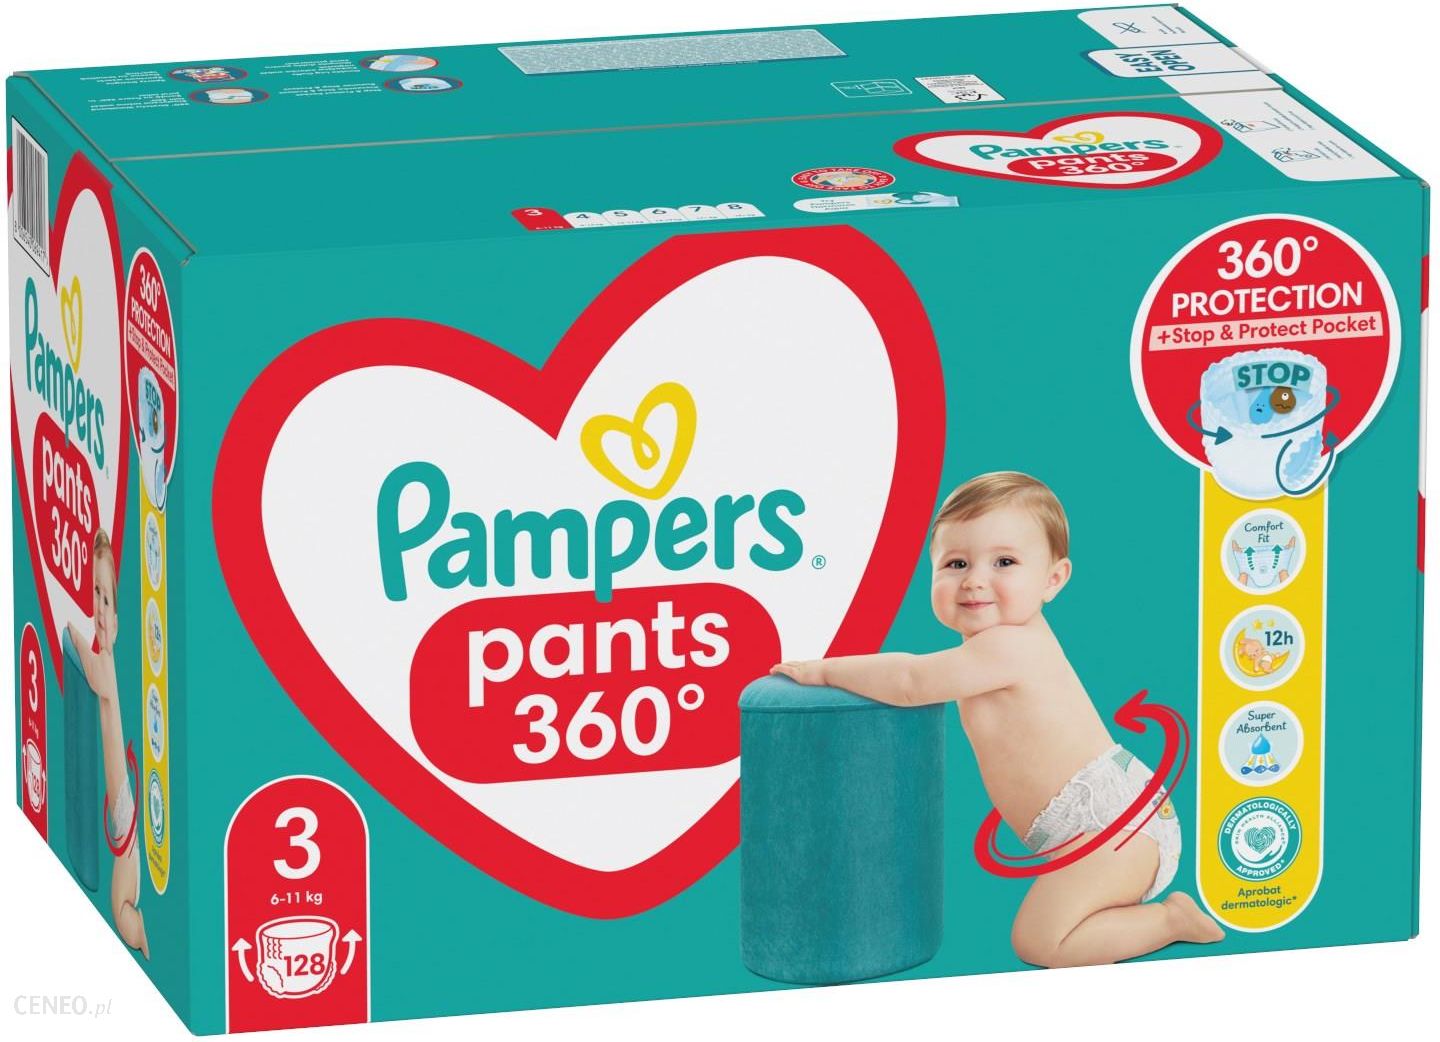 pampers baby dry extra large plus